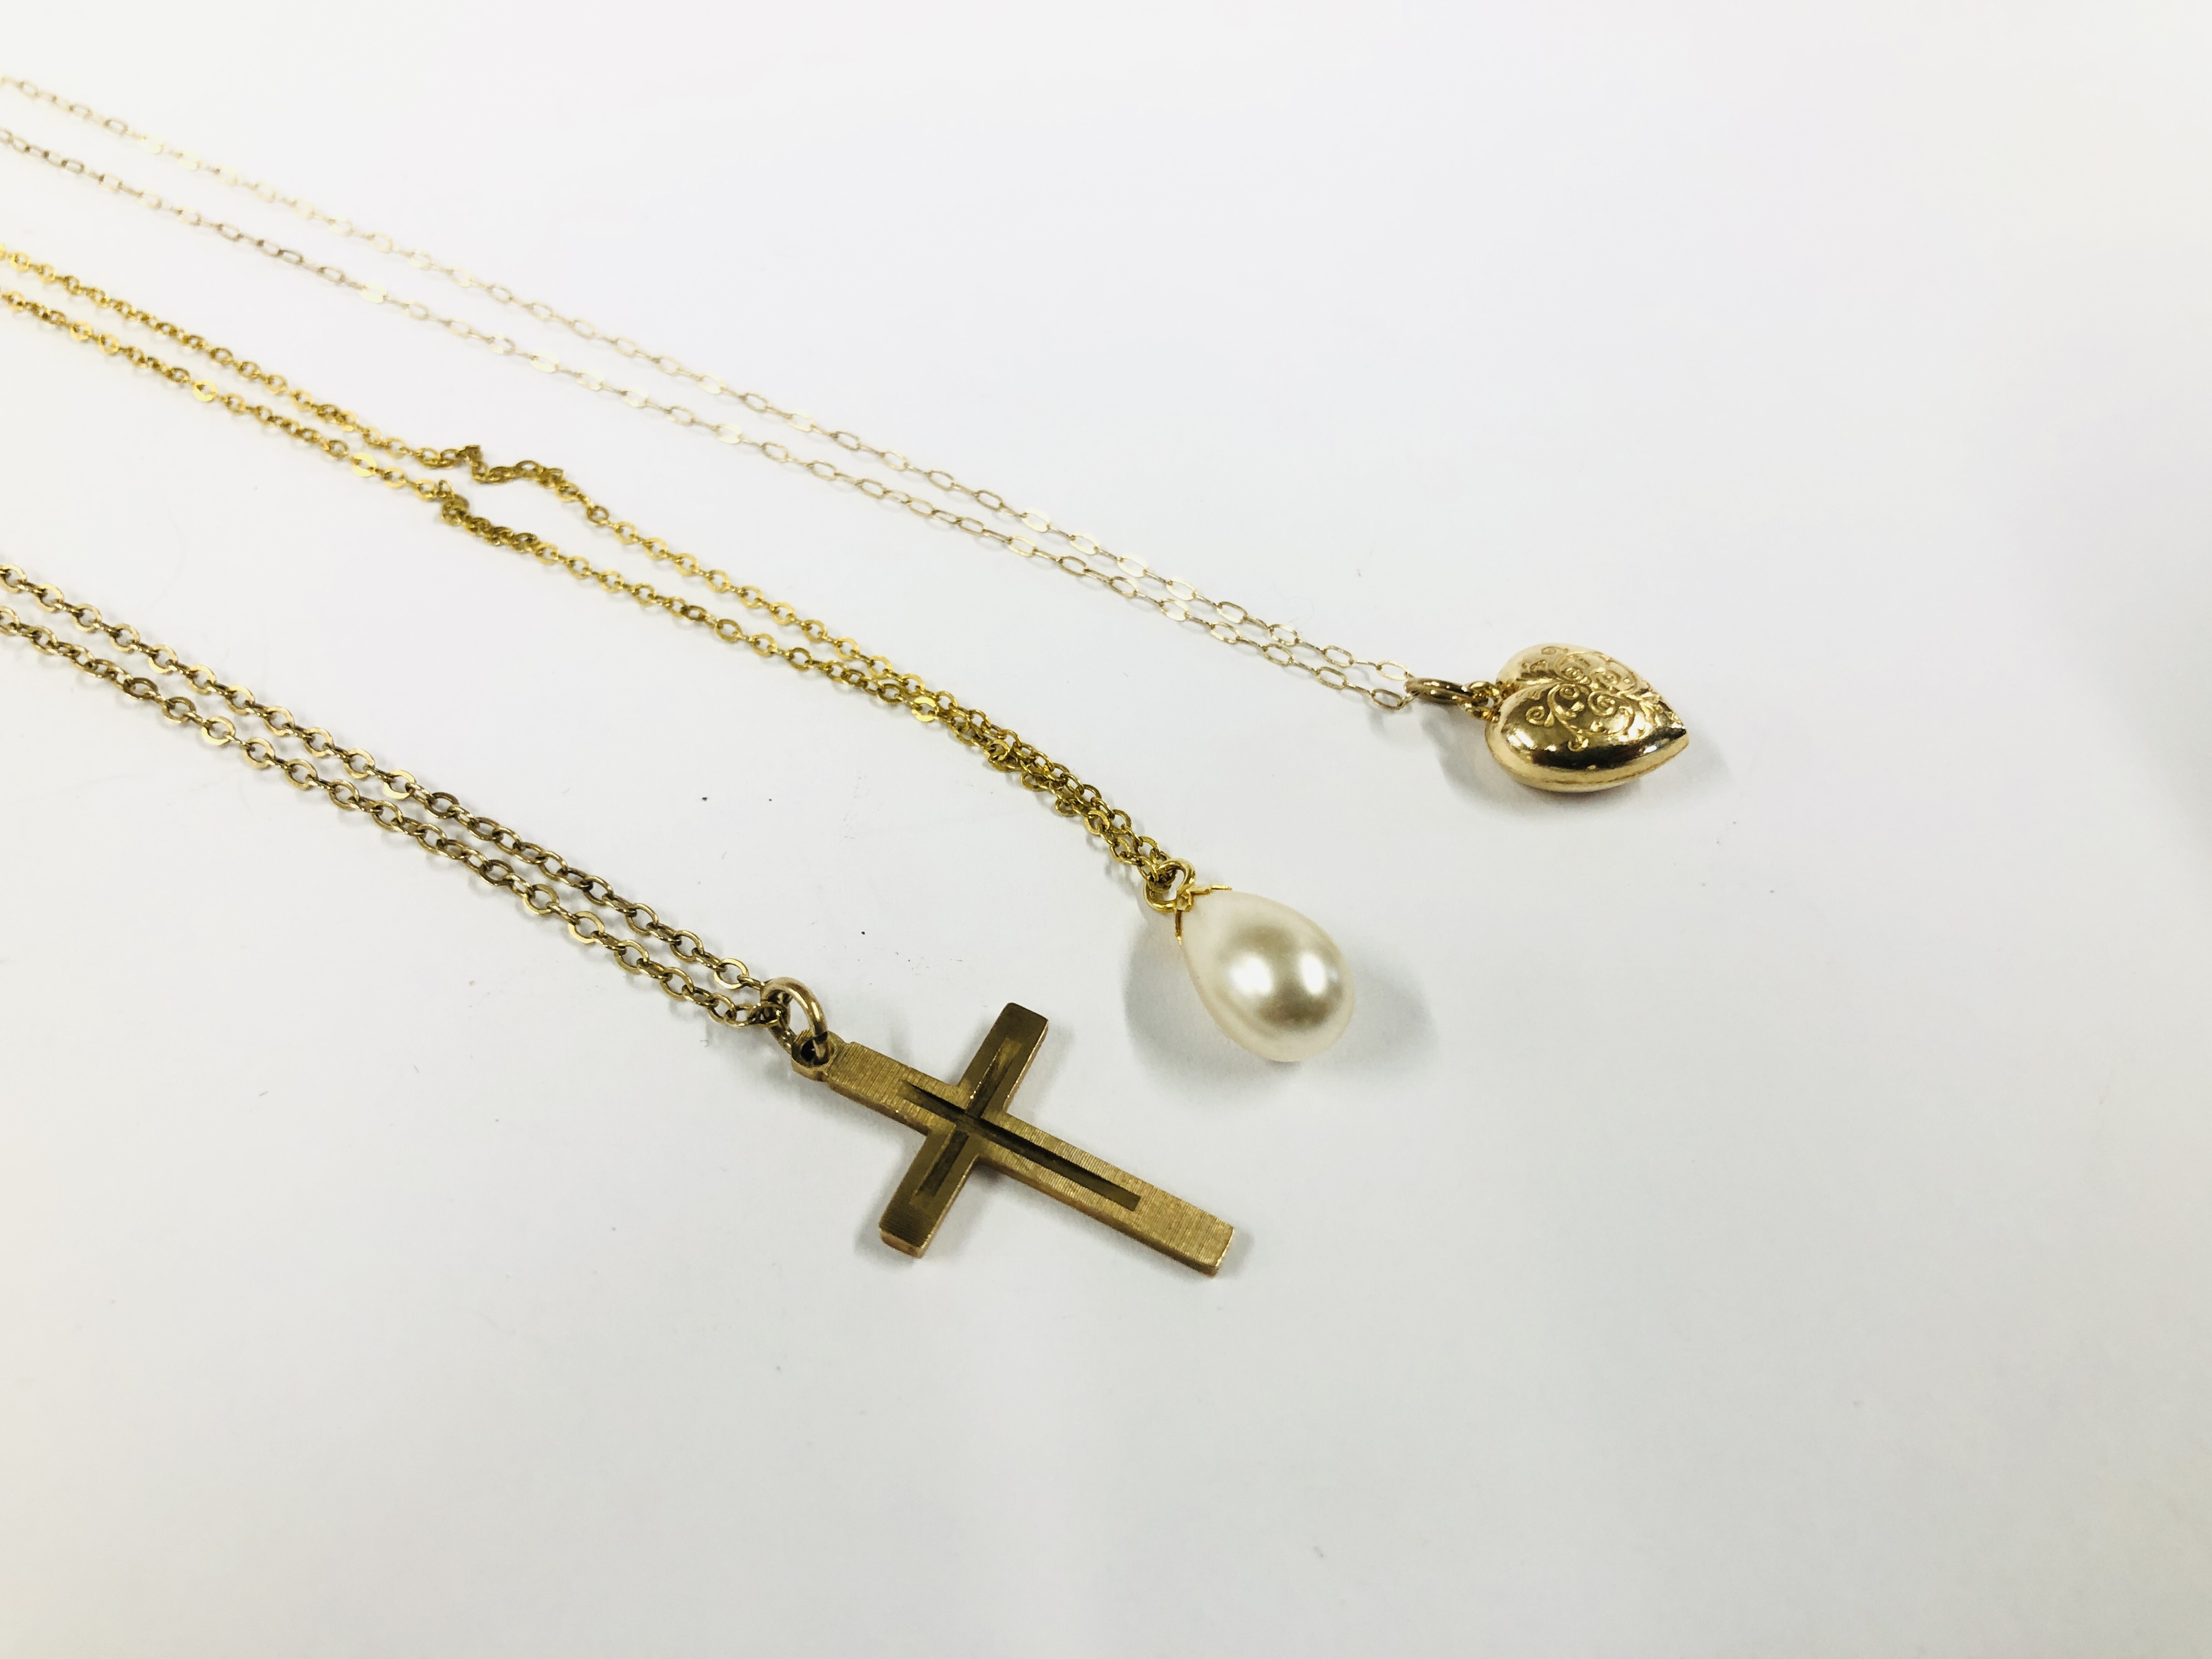 A 9CT GOLD FINE LINK NECKLACE WITH 9CT GOLD CROSS PENDANT,